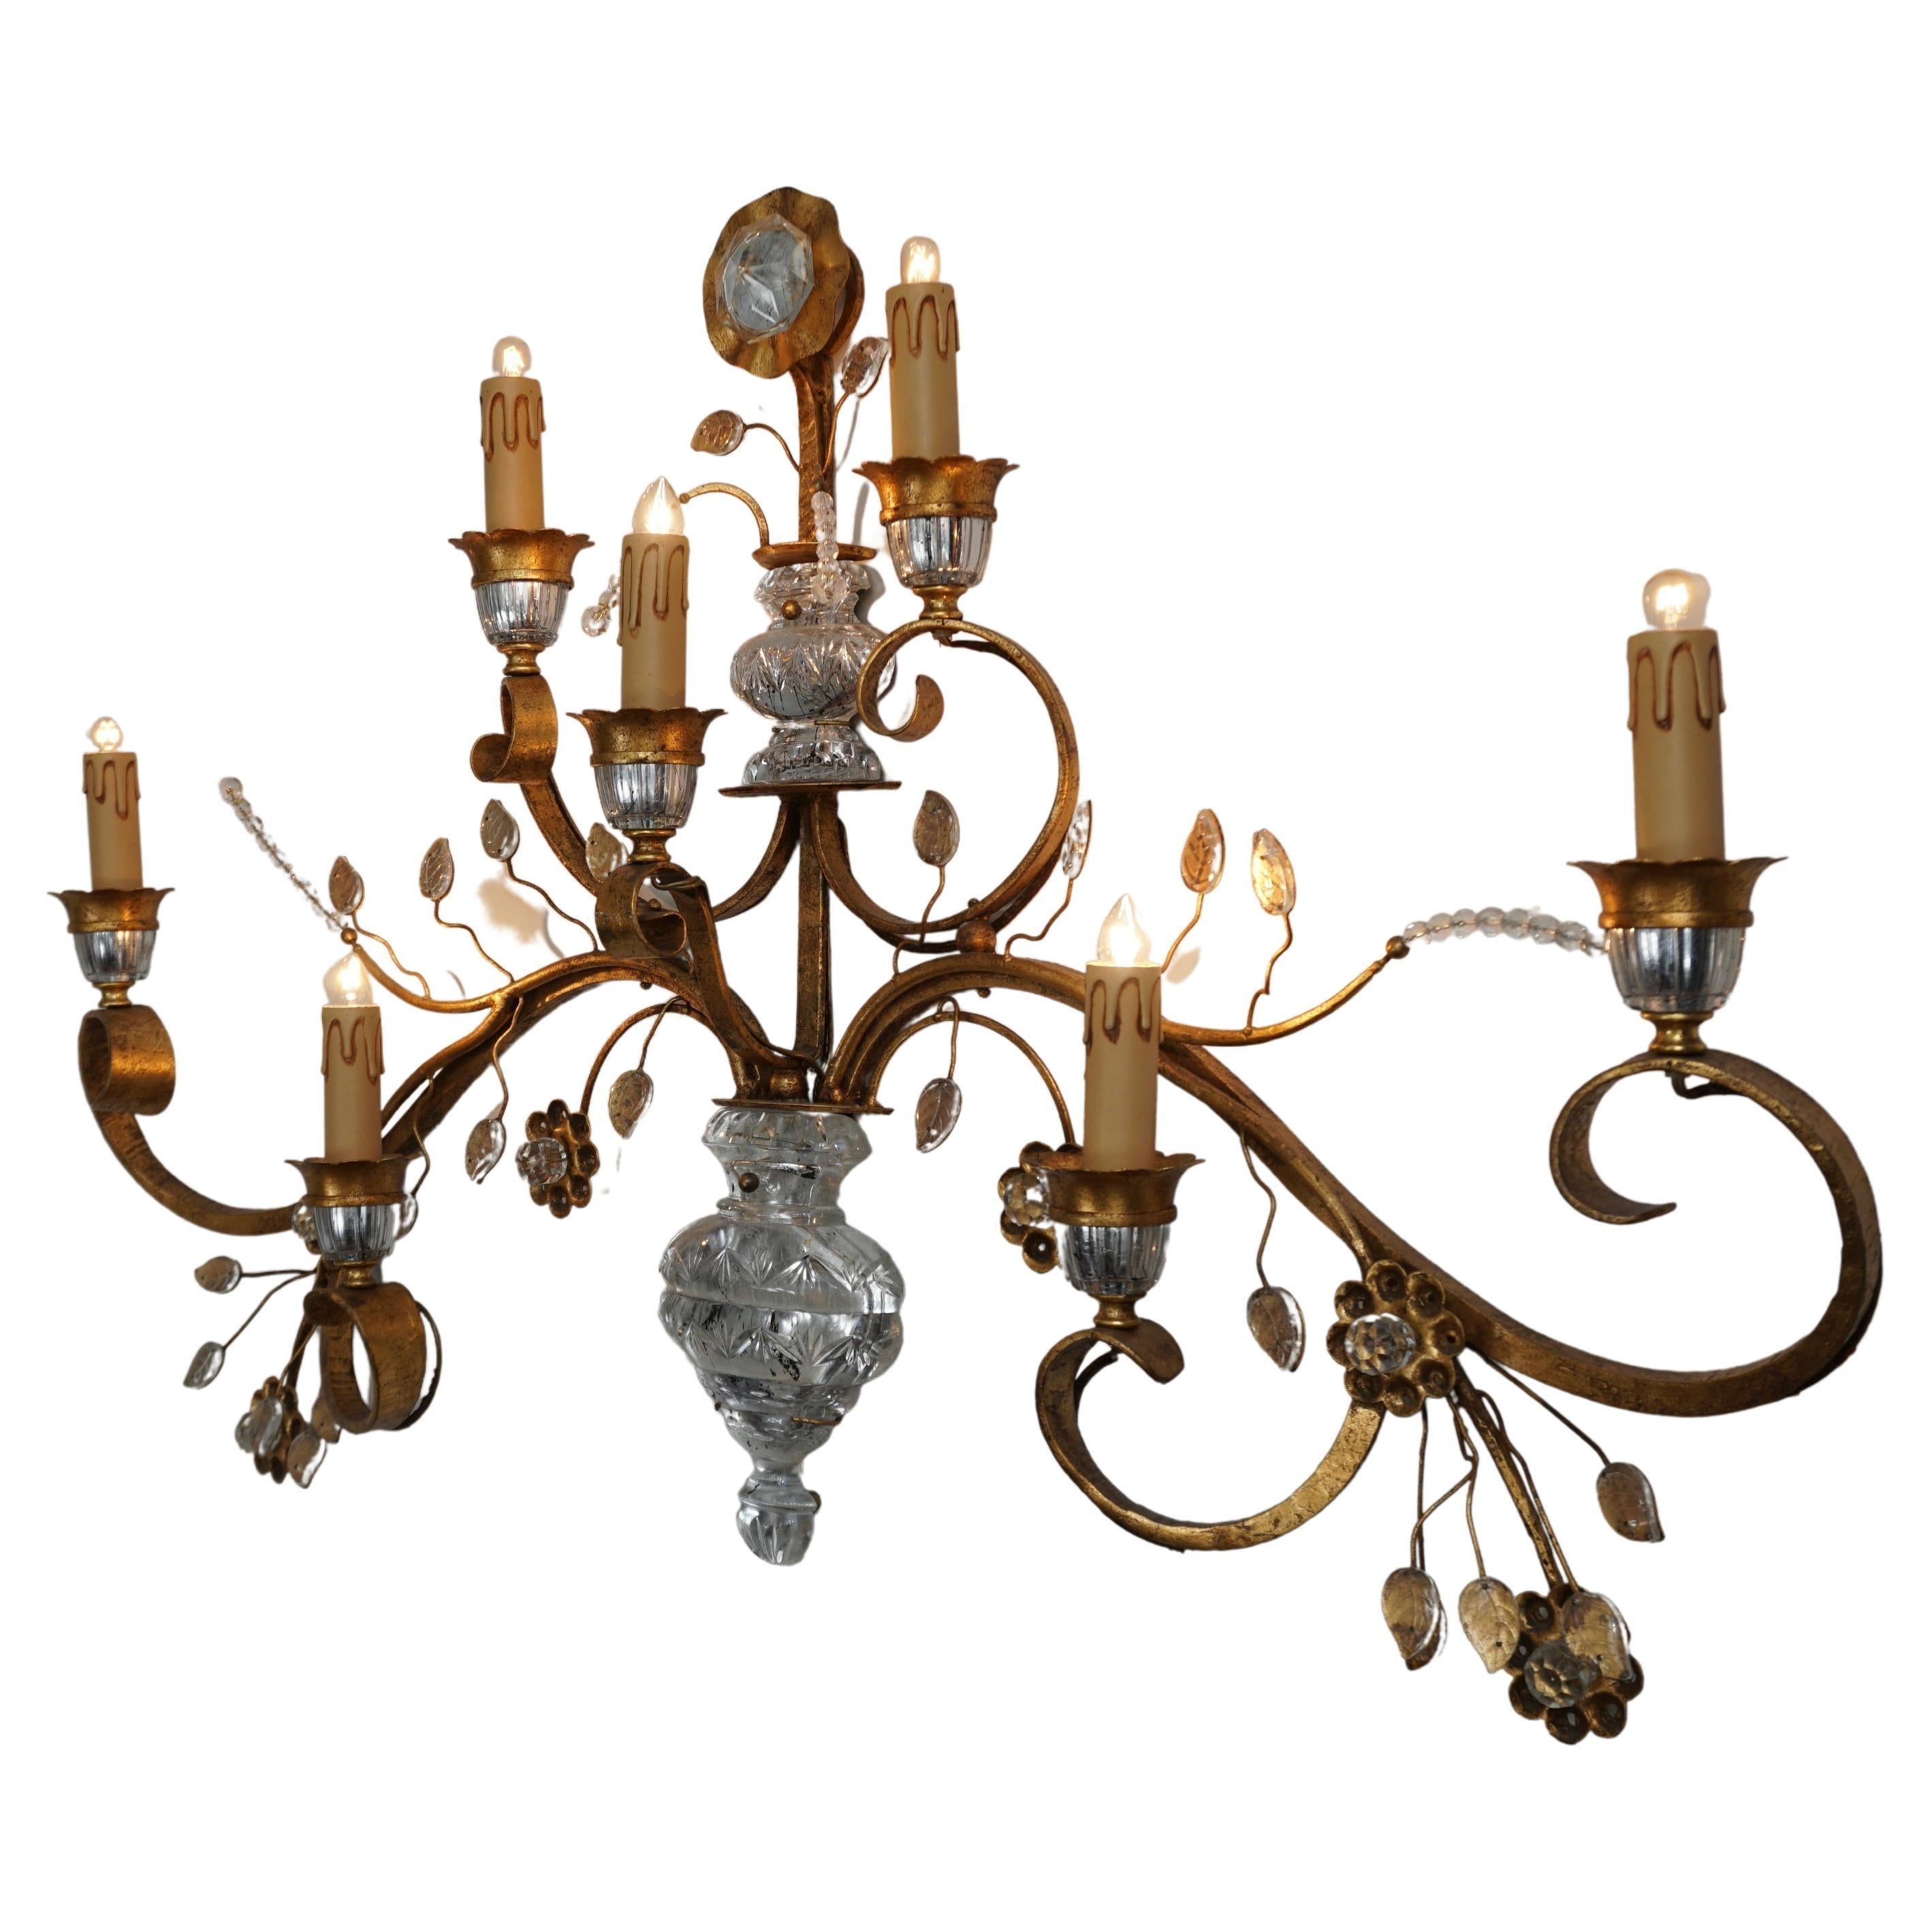 Very nice large Hollywood Regency style gilt metal and glass wall light fixture.